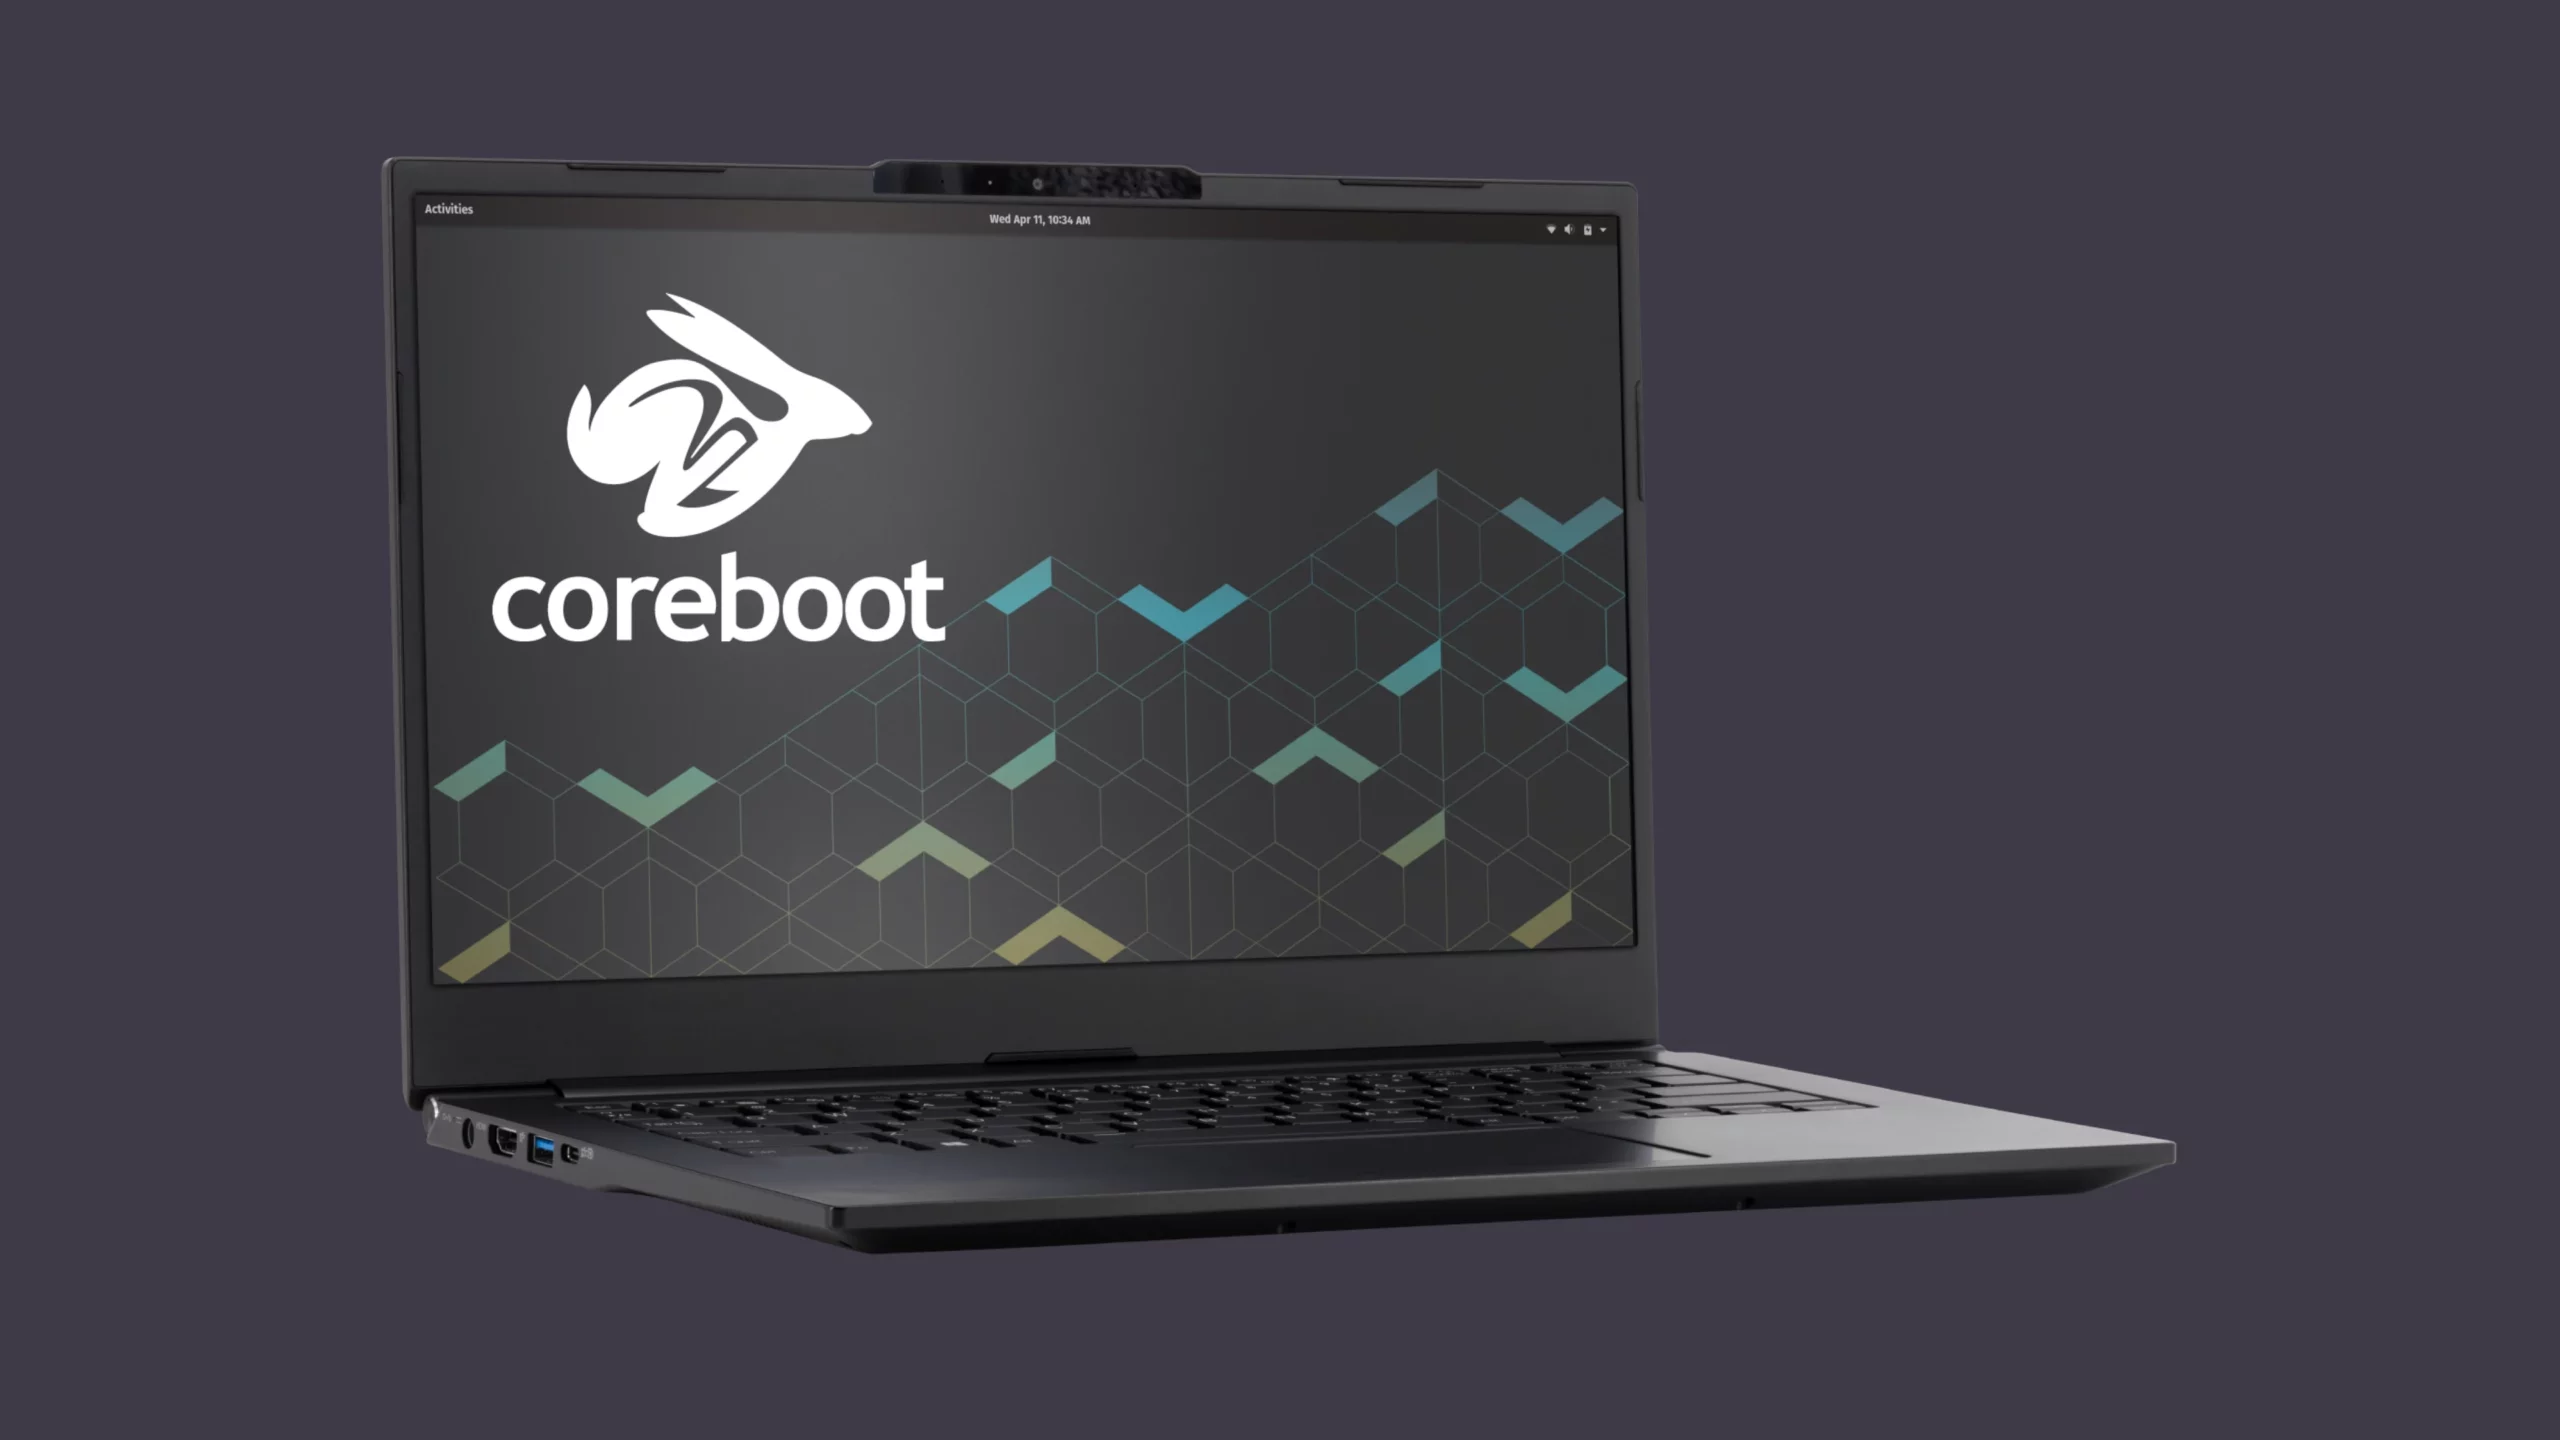 System76 Updates Lemur Pro Linux Laptop with 13th-Gen Intel CPUs and DDR5 RAM